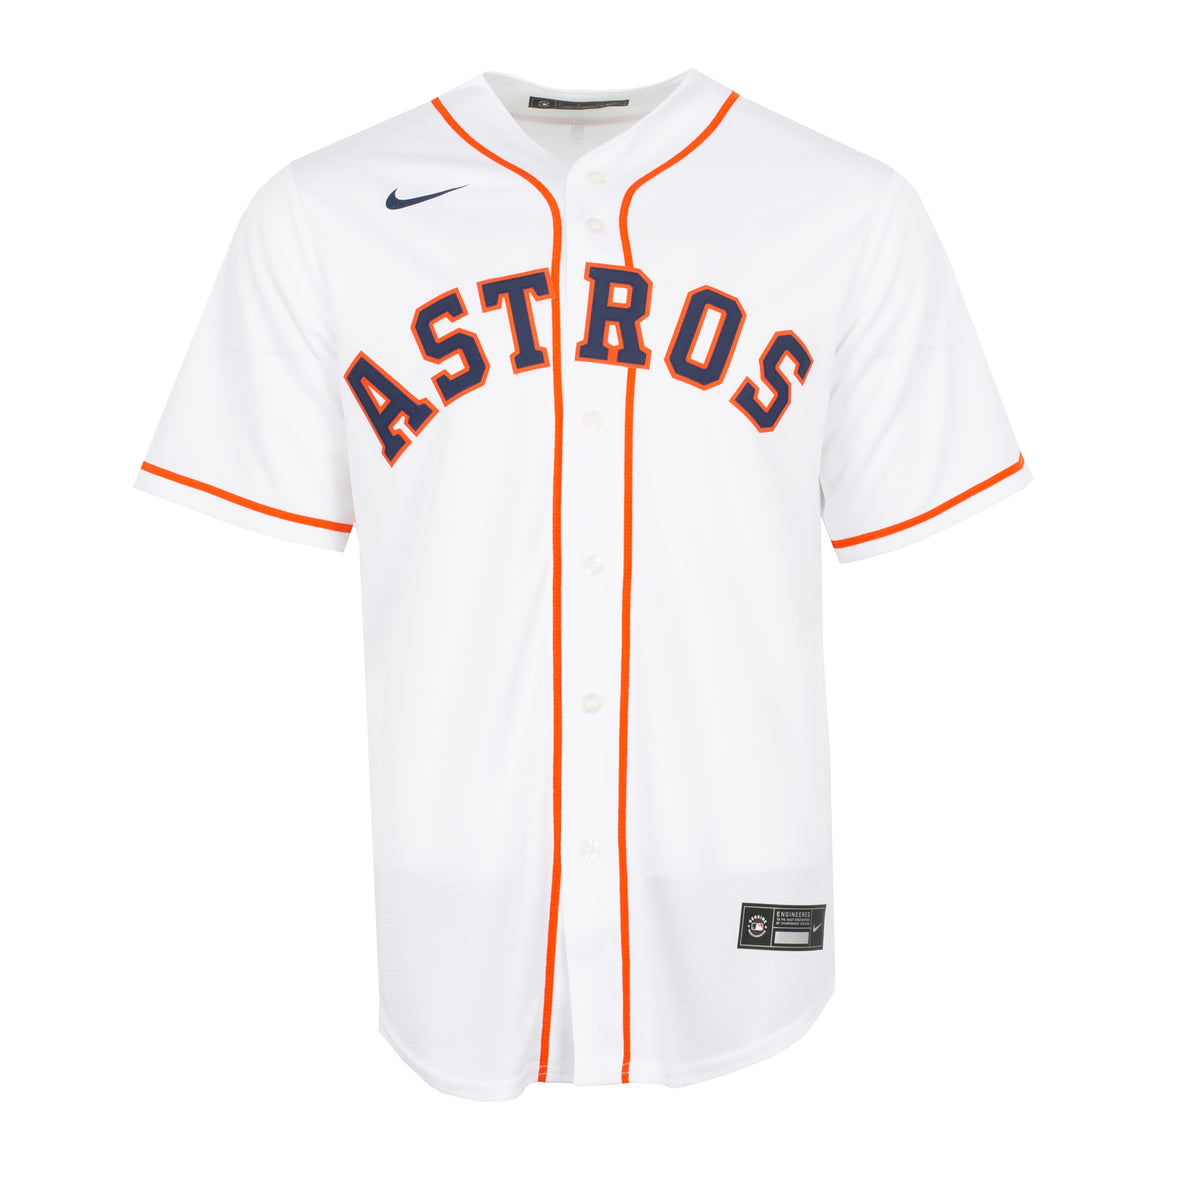 astros jersey day